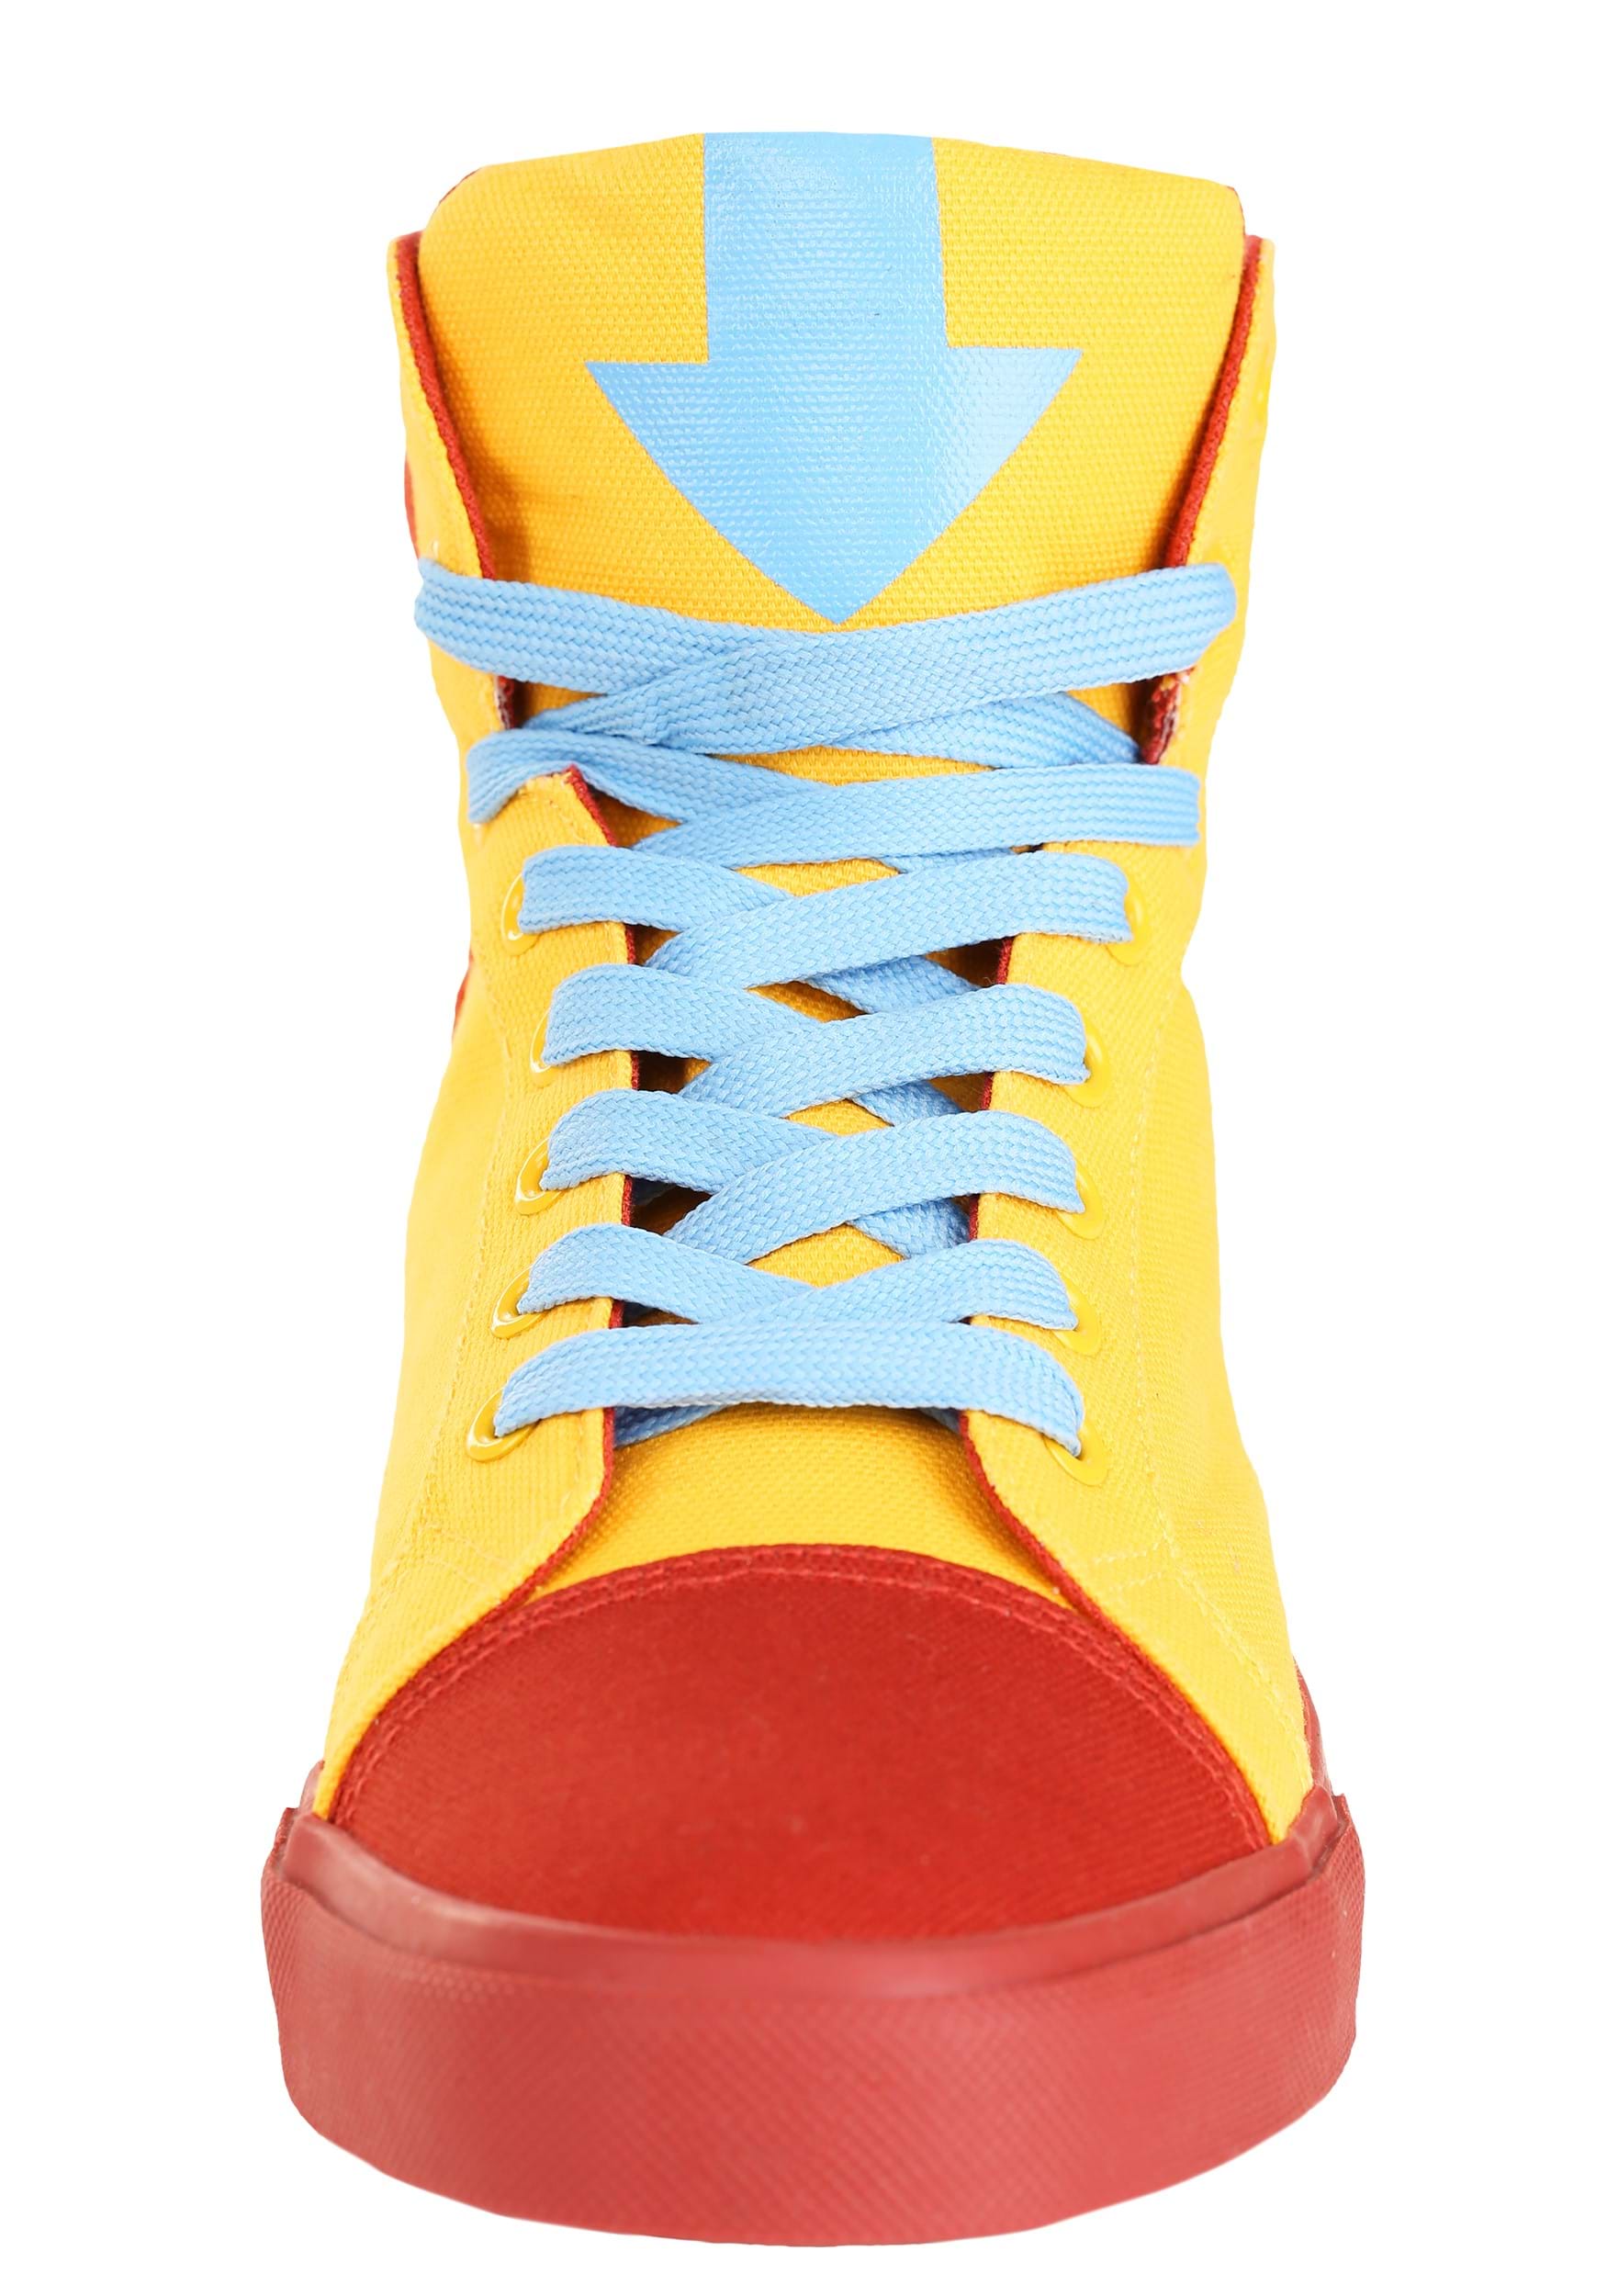 Unisex Avatar: The Last Airbender Shoes